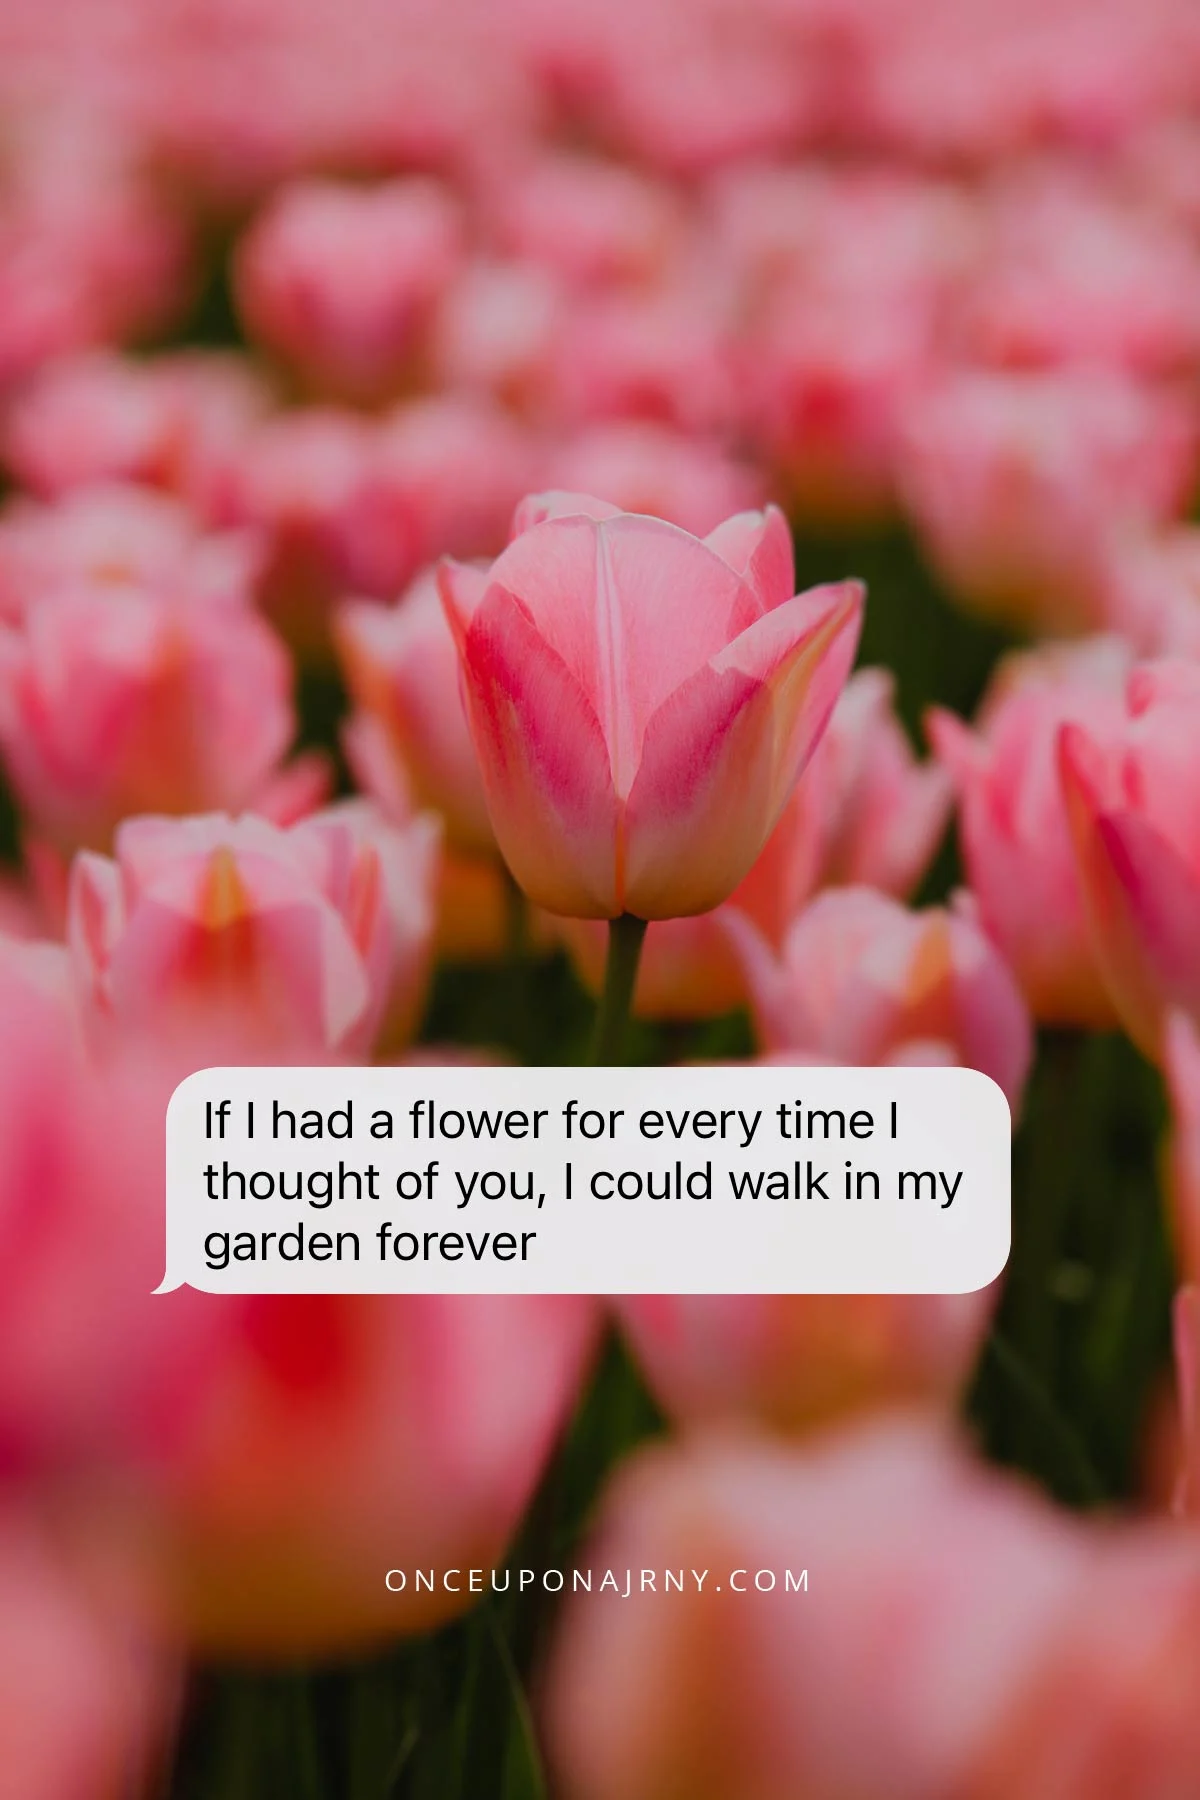 If I had a flower for every time I thought of you, I could walk in my garden forever flower lesbian quote